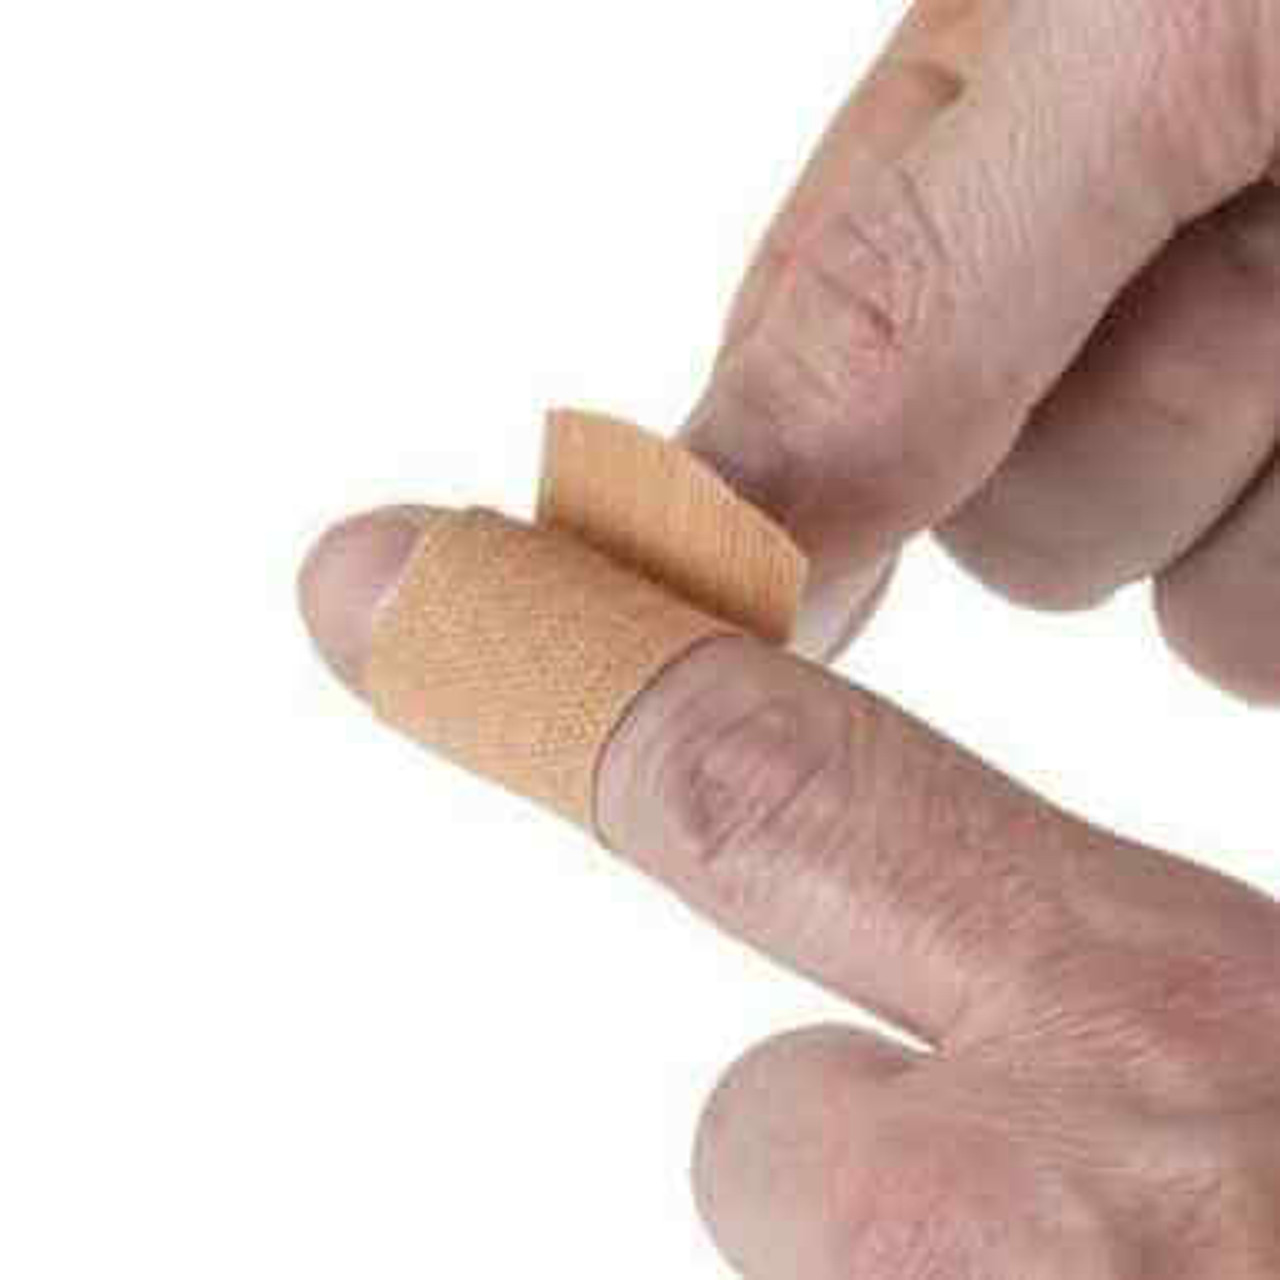 Woven Finger Tip Bandages - Bulk First Aid Supplies